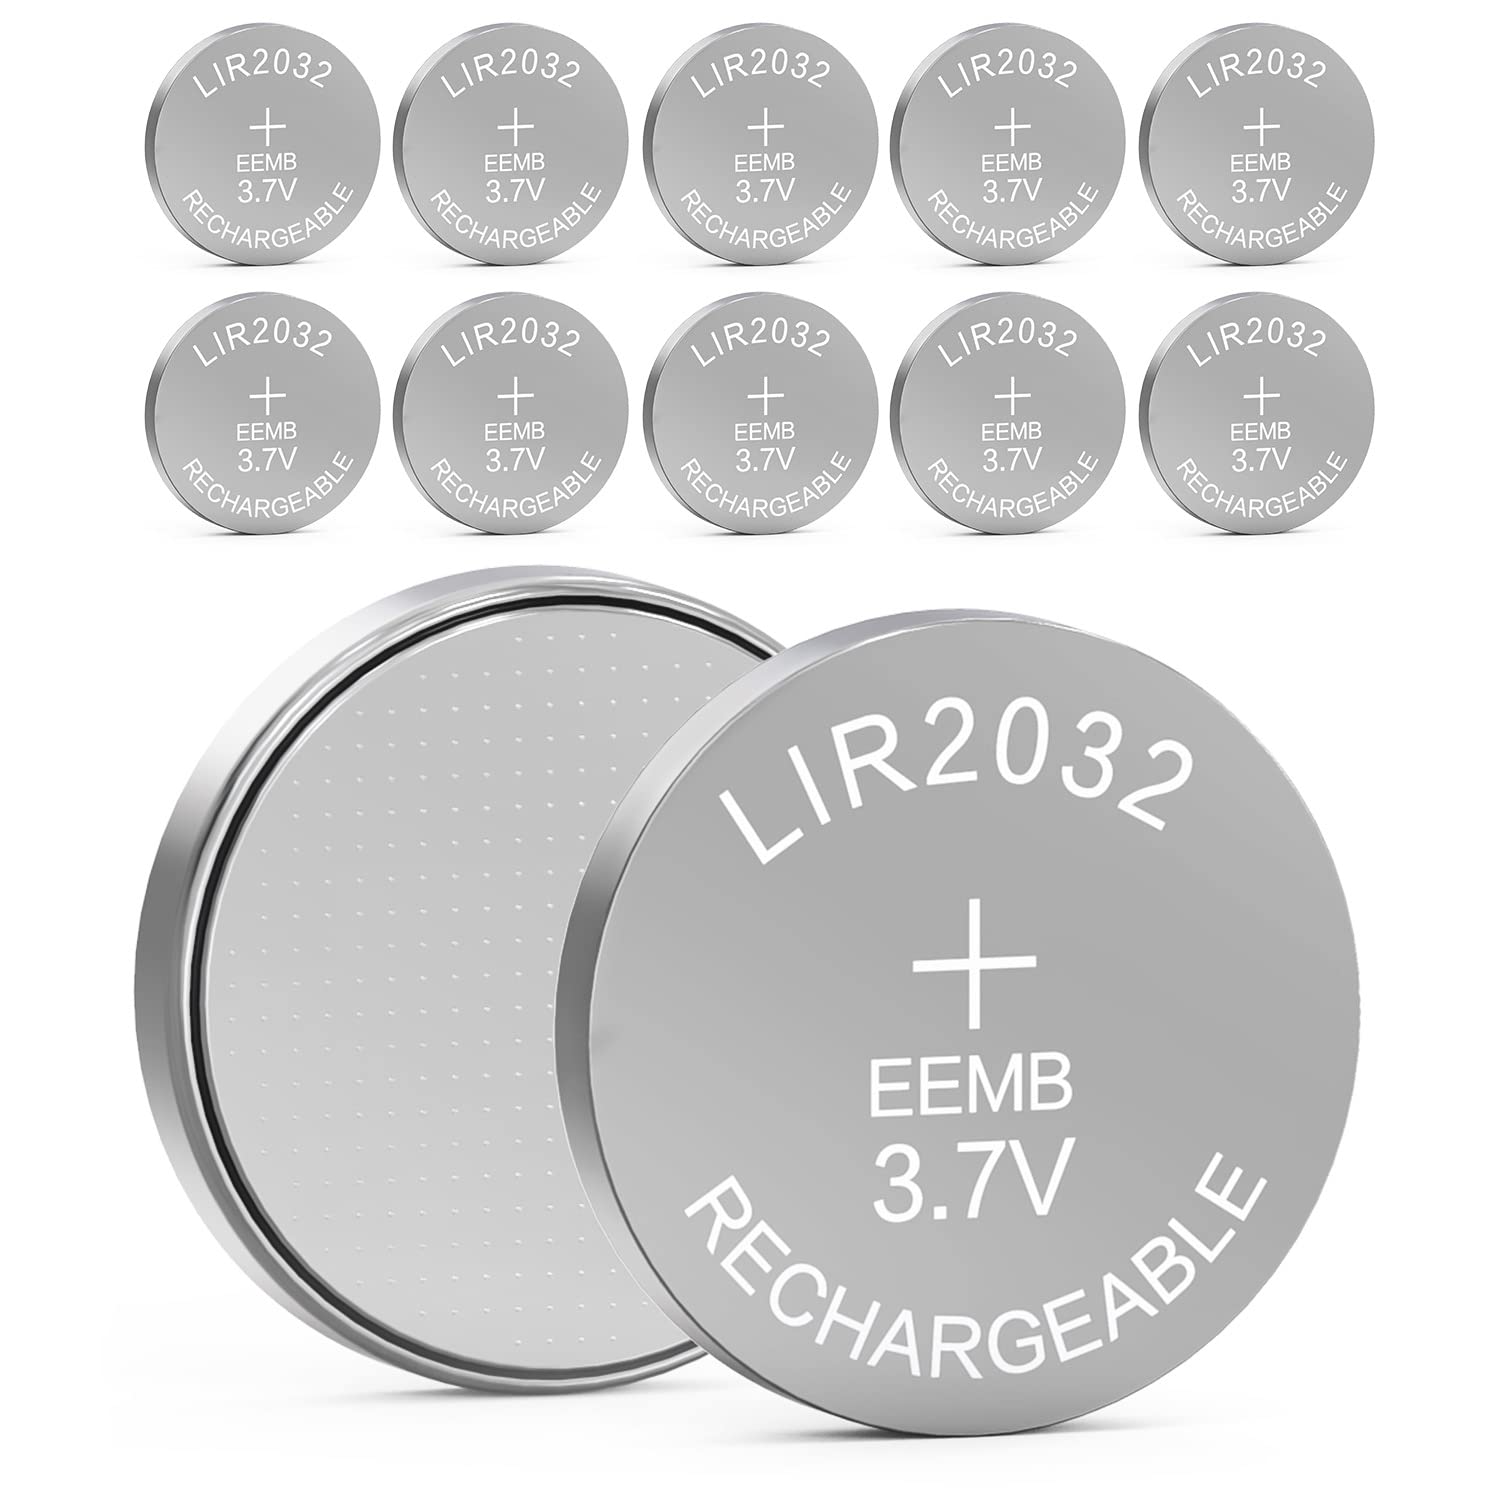 EEMB 10PCS LIR2032 Rechargeable Battery 3.7V Lithium-ion Coin Button Cell Batteries 45mAh 2032 Rechargeable Battery